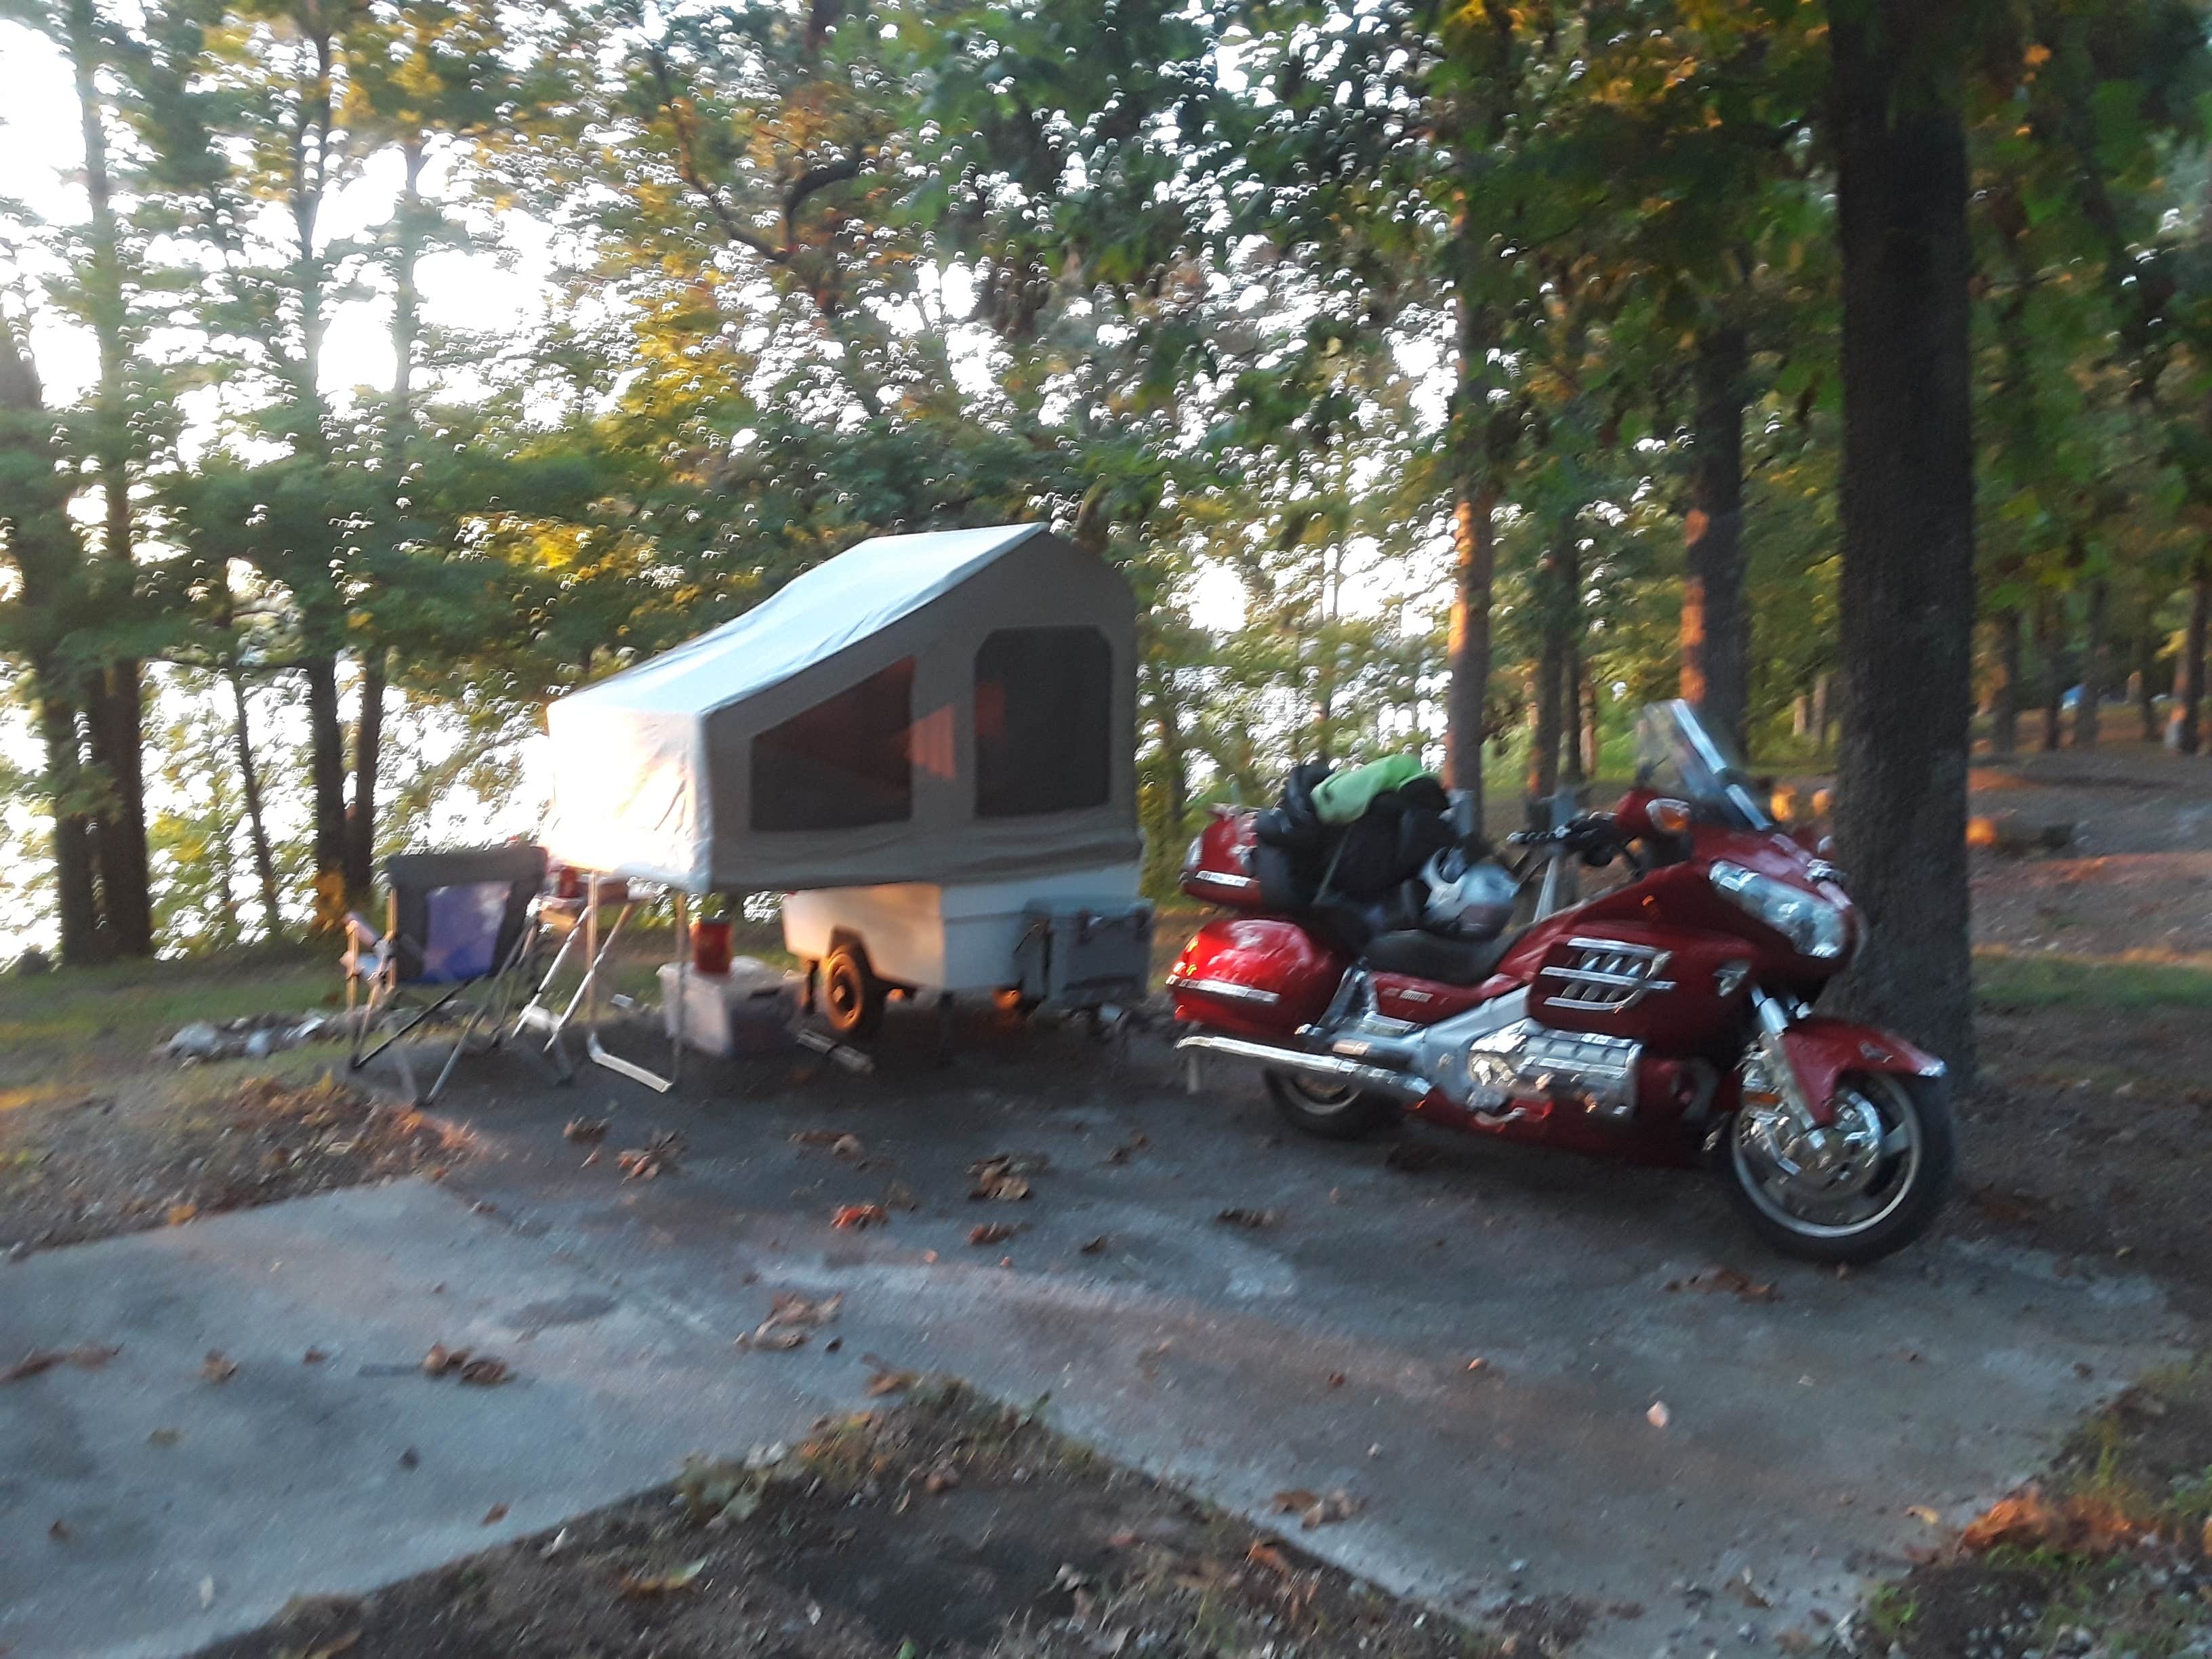 Camper submitted image from Colbert County Rose Trail Park - 3